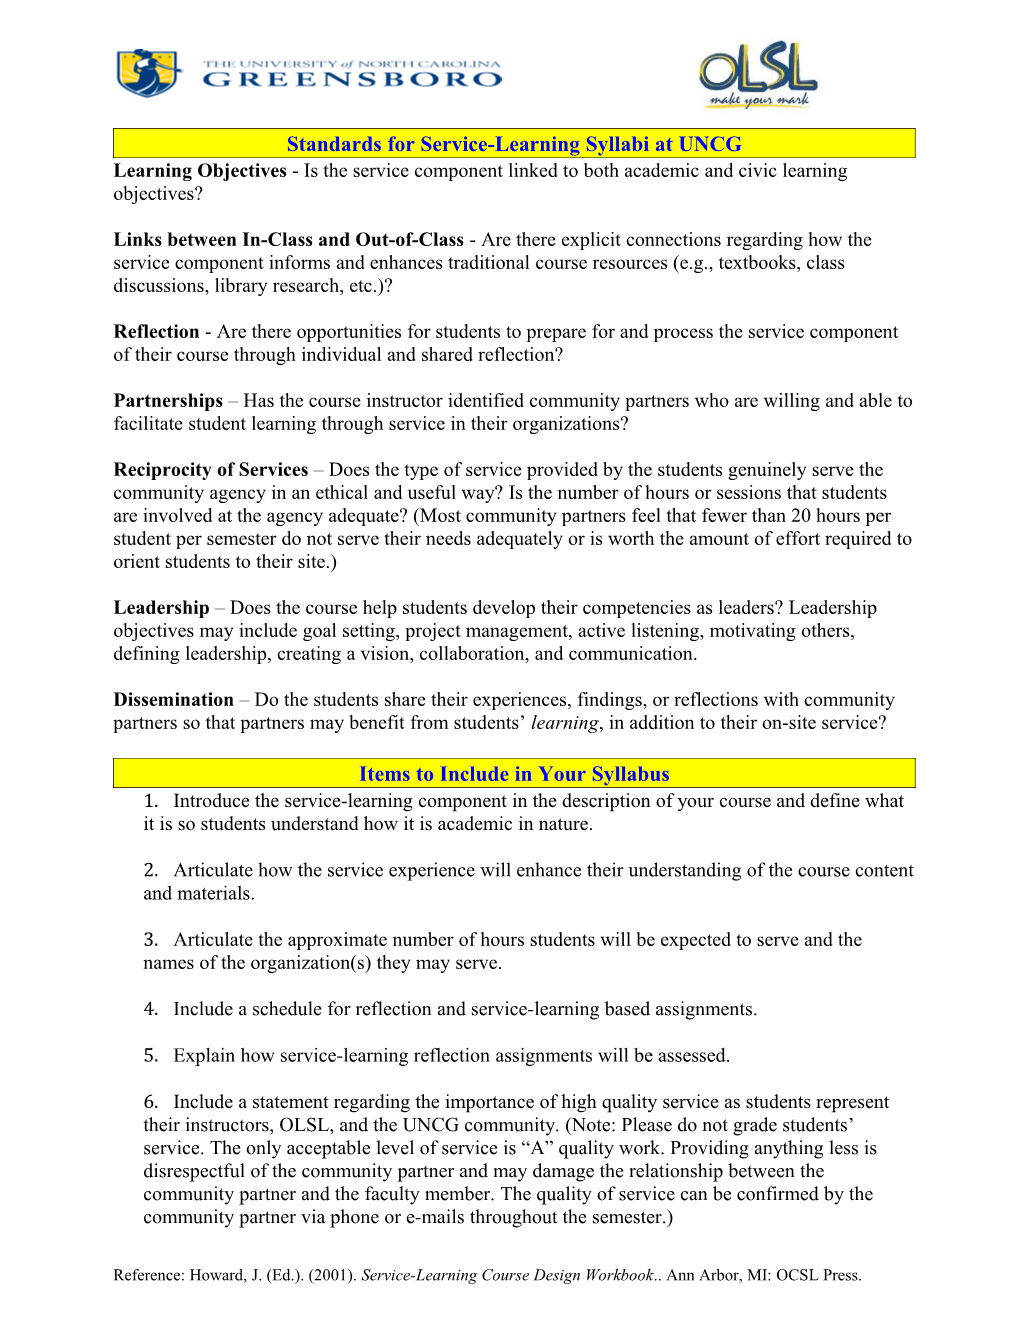 Standards for Service-Learning Syllabi at UNCG